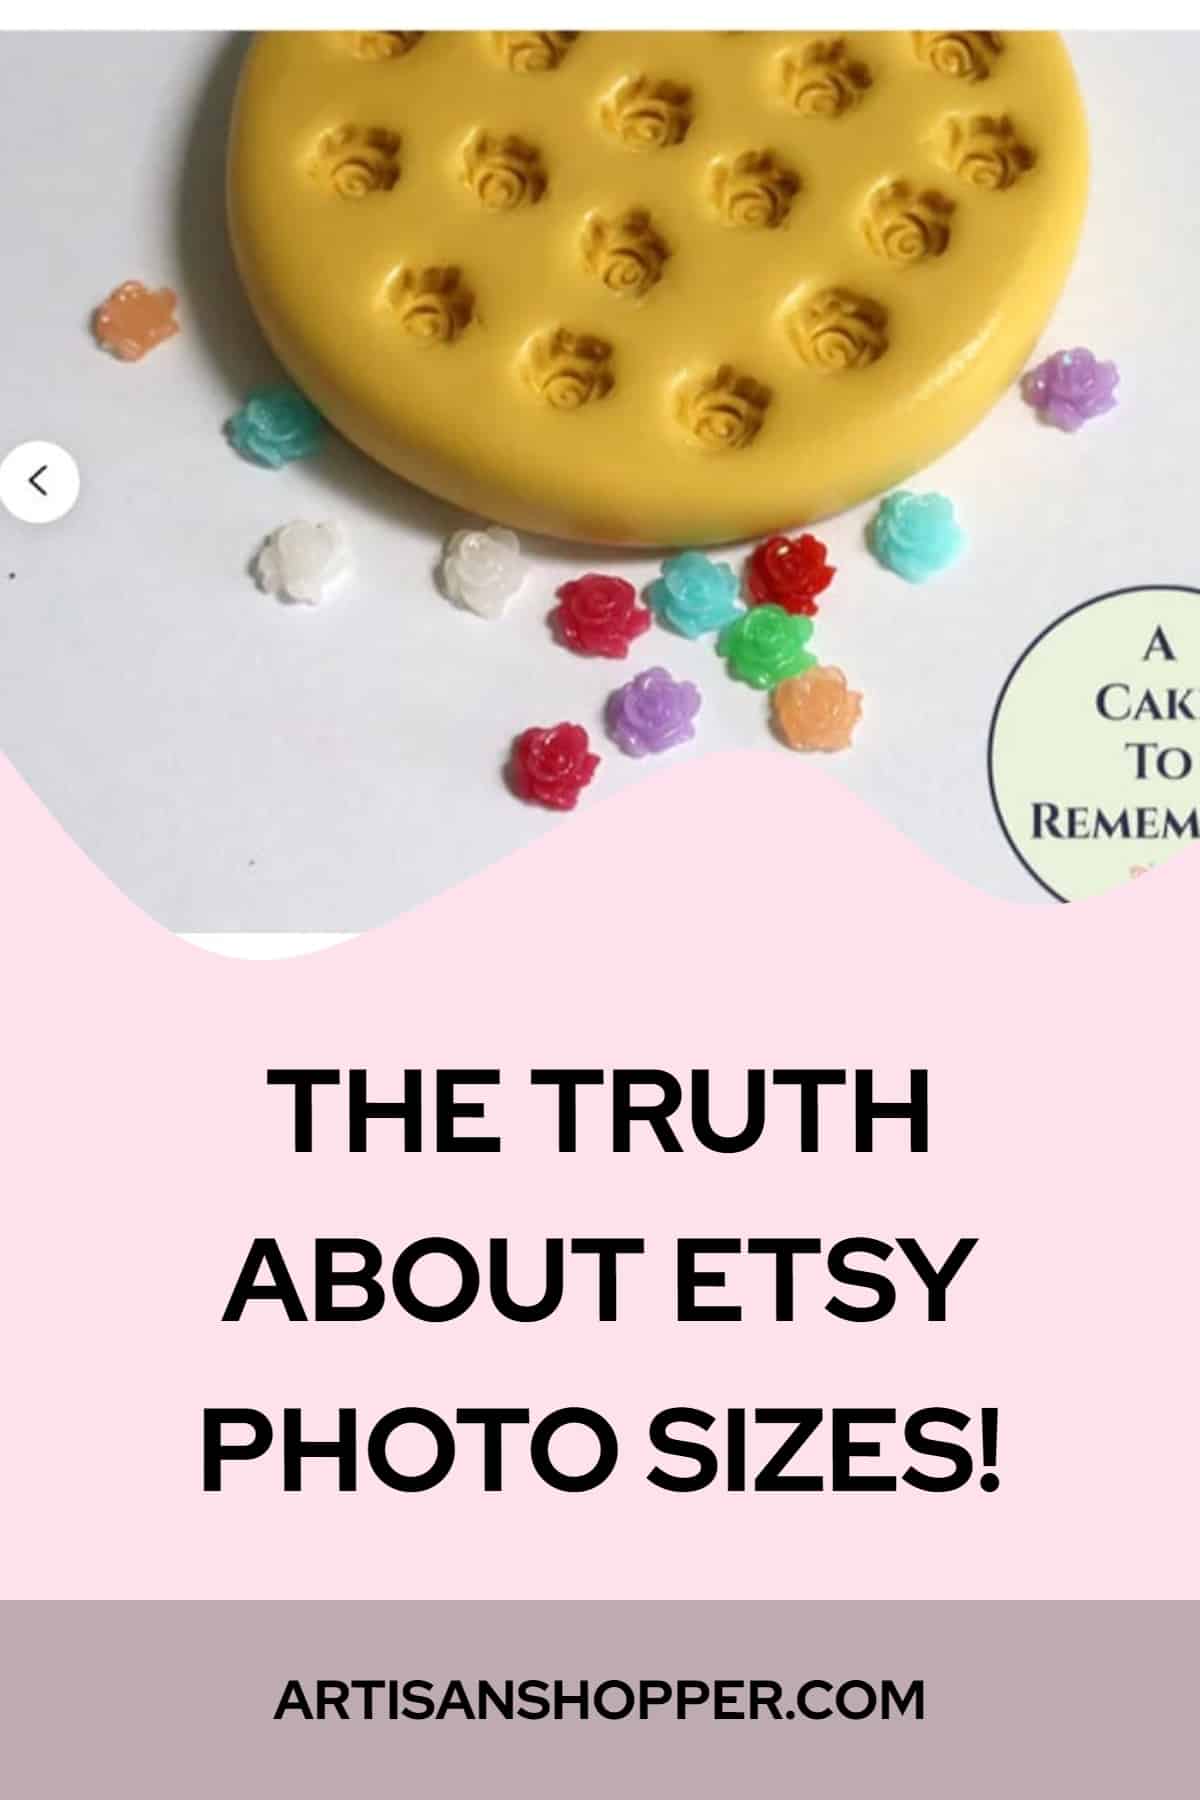 What’s The Best Etsy Listing Photo Size? (Does It Really Matter